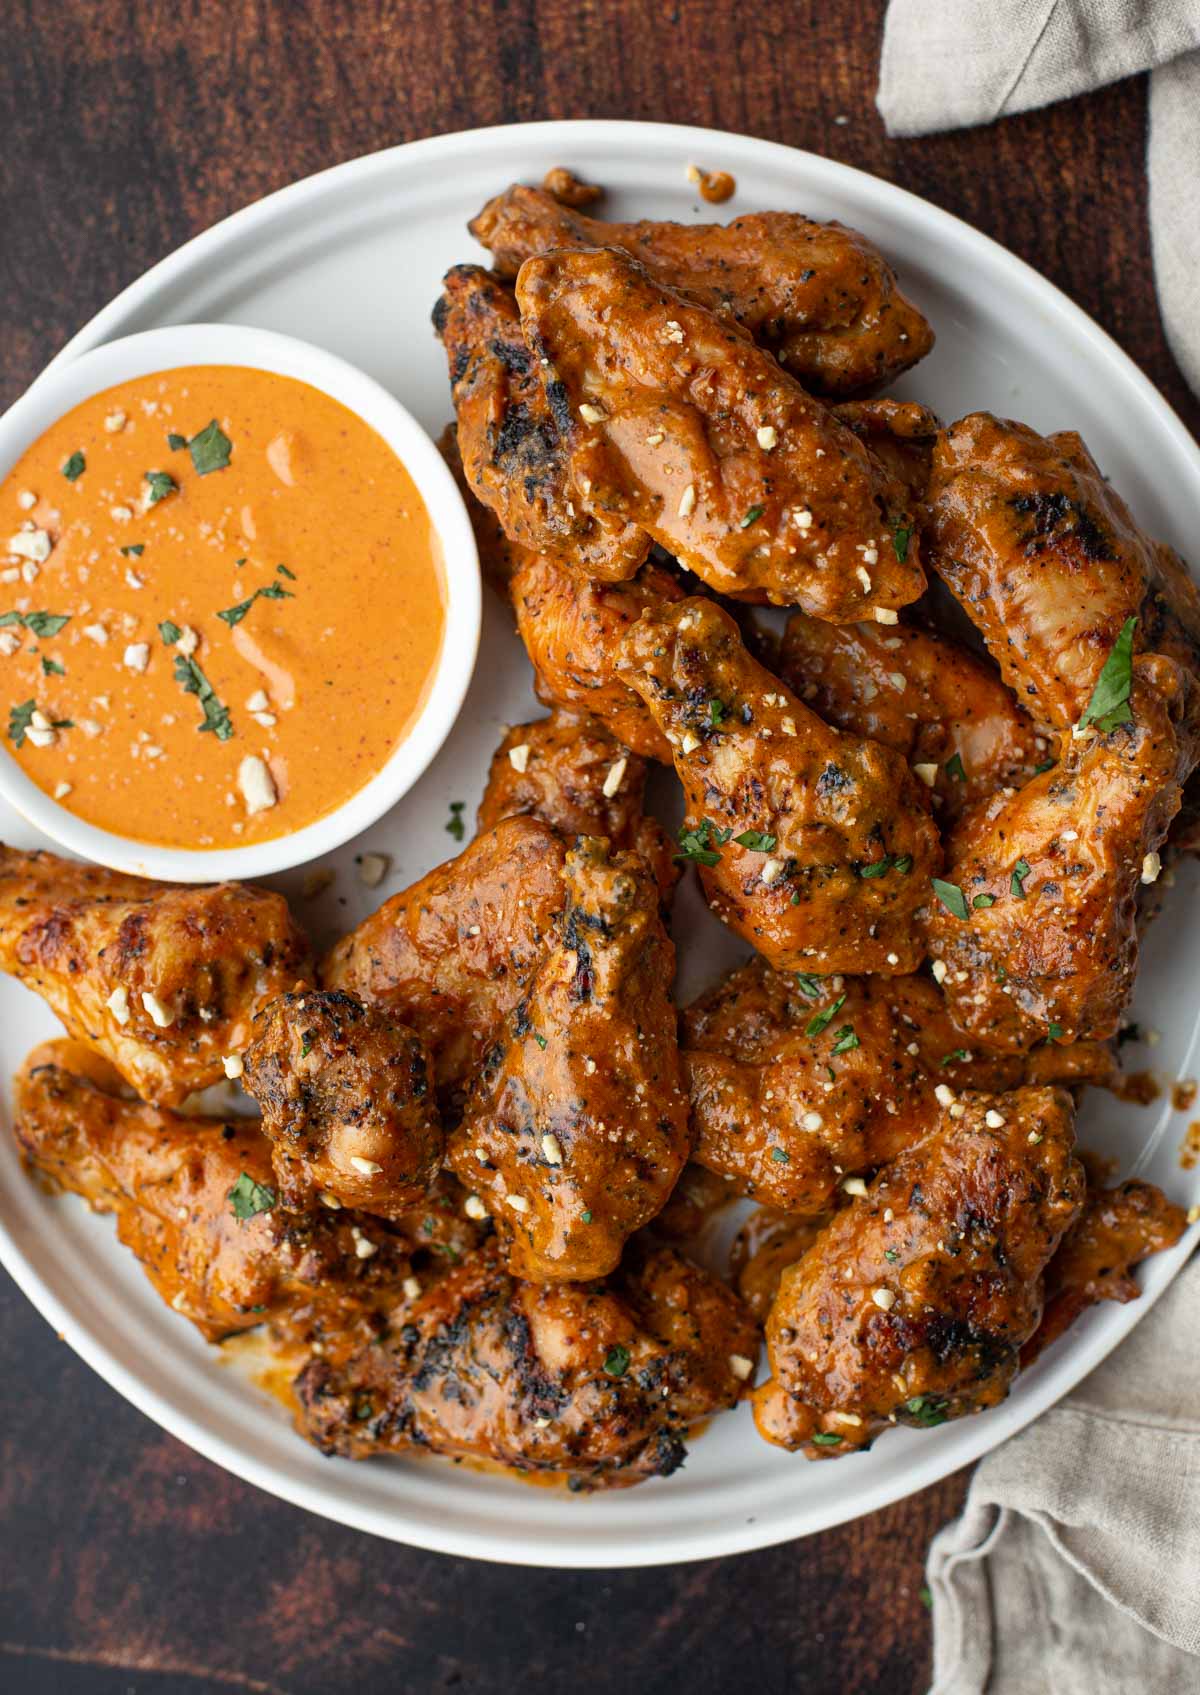 Grilled chicken wings on a plate with spicy peanut sauce.